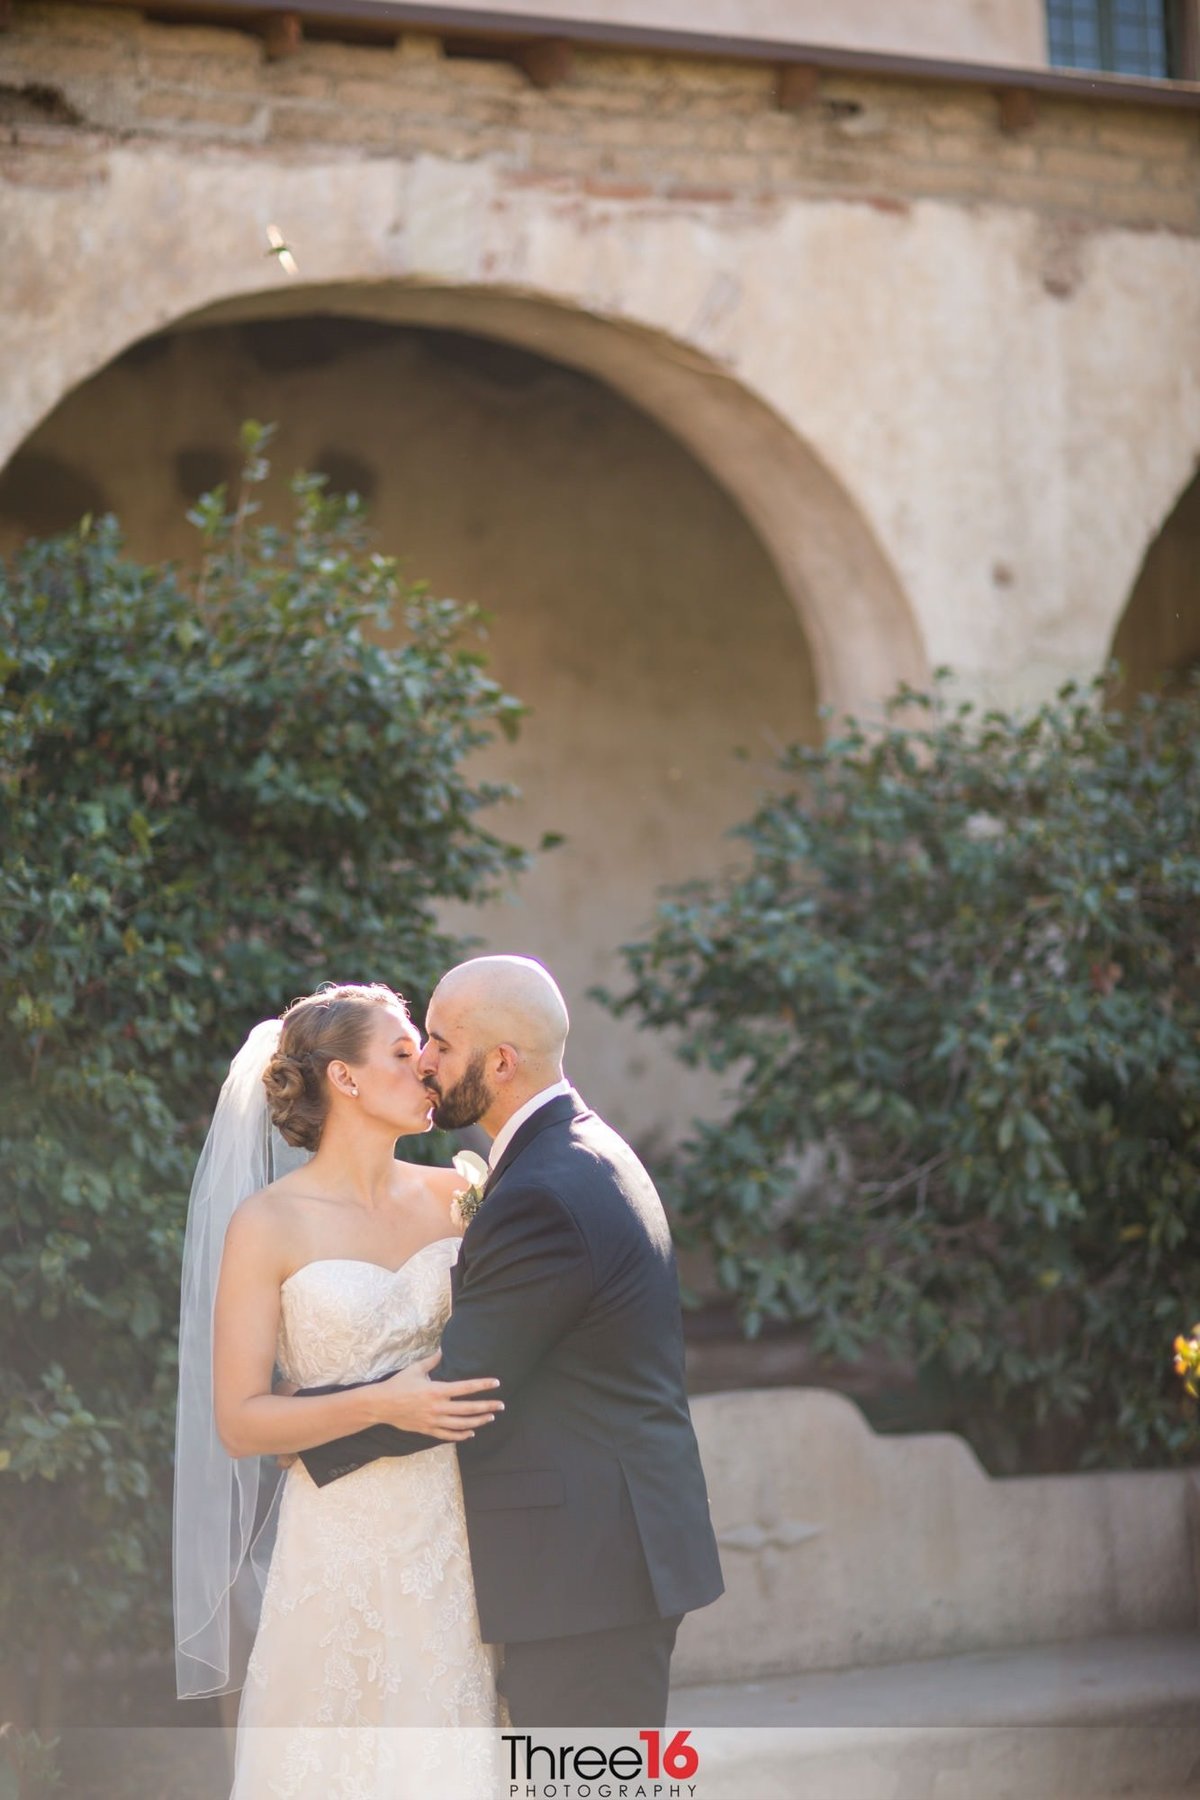 Bride and Groom share an intimate kiss after the ceremony during alone time